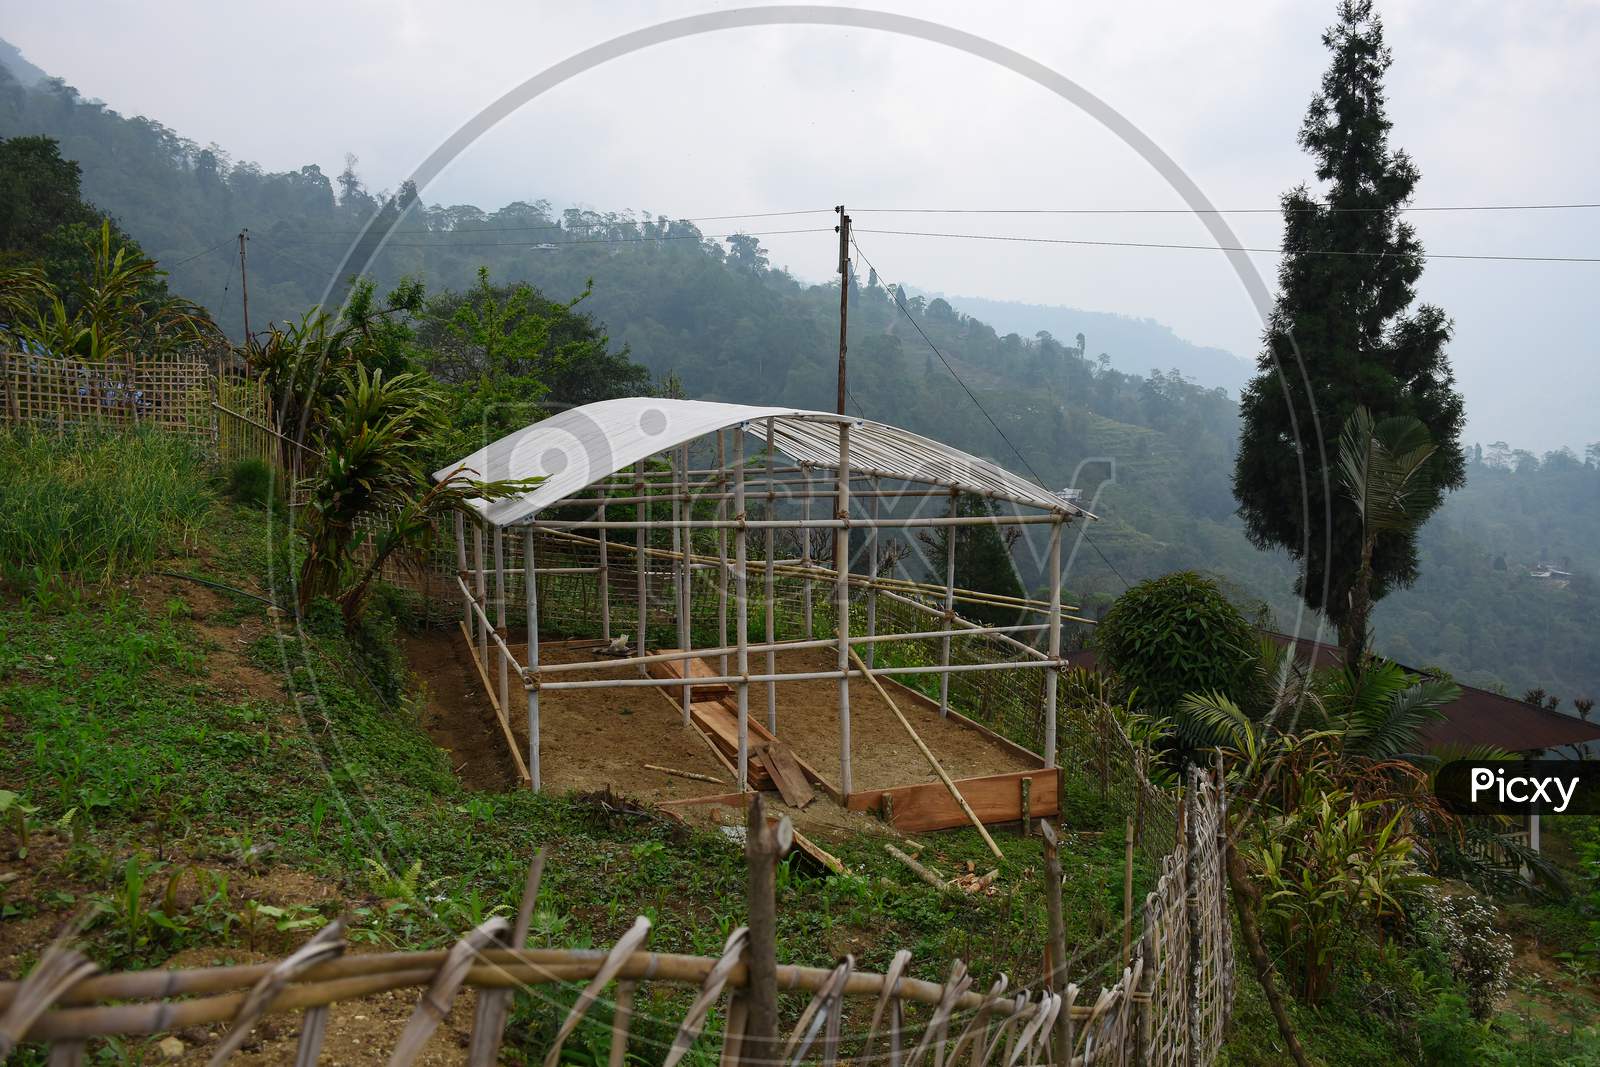 Greenhouse Under Construction With Plastic Roof.